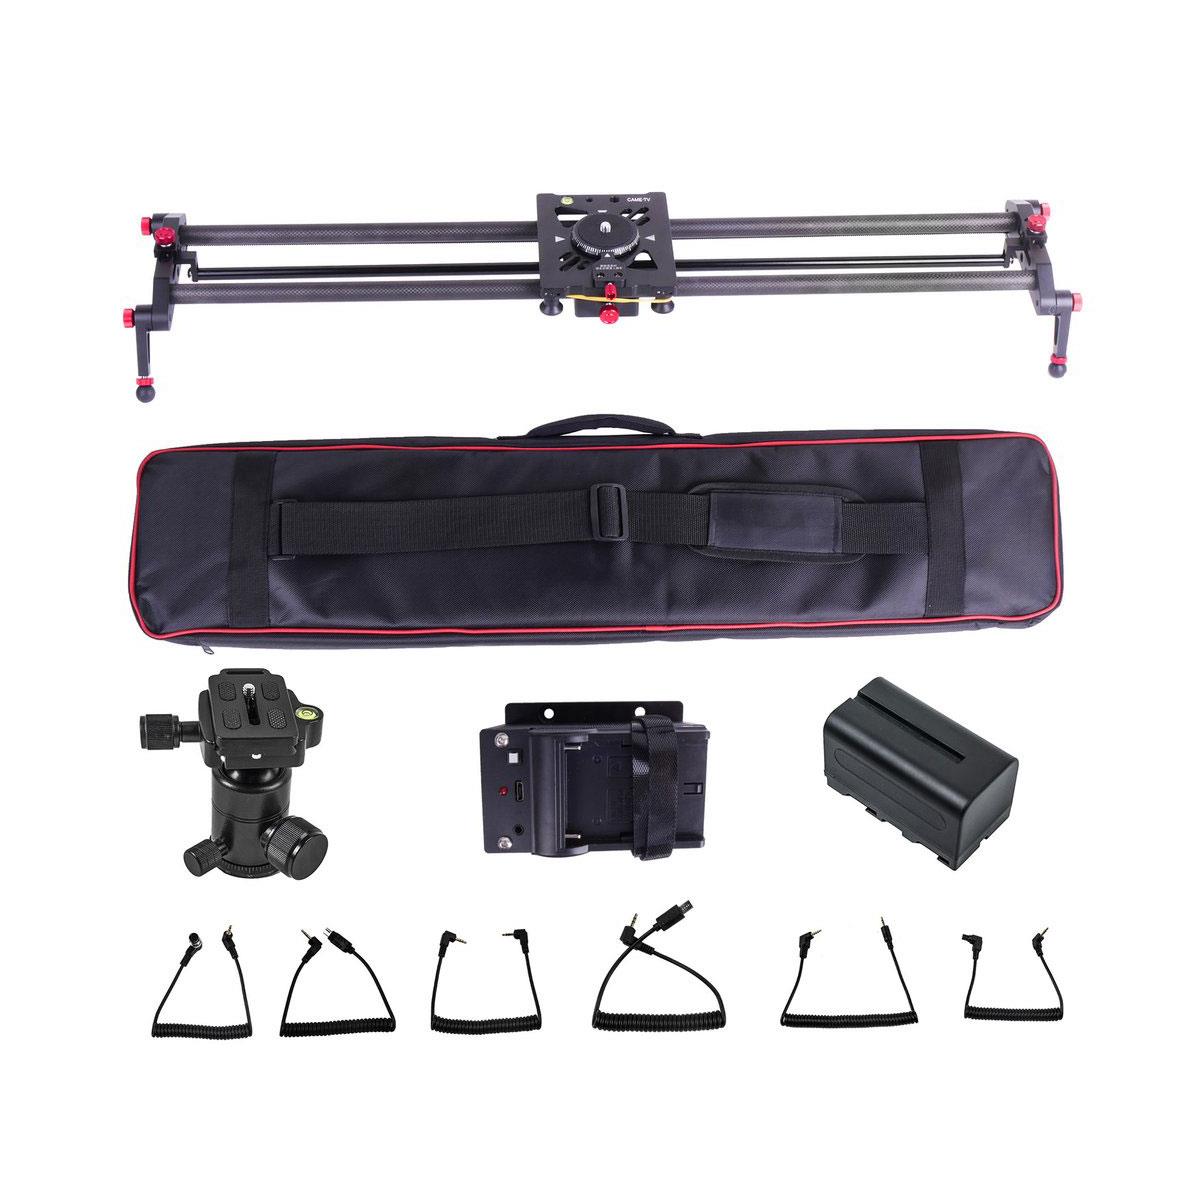 Image of Came-TV 80cm Motorized Parallax Slider with Bluetooth